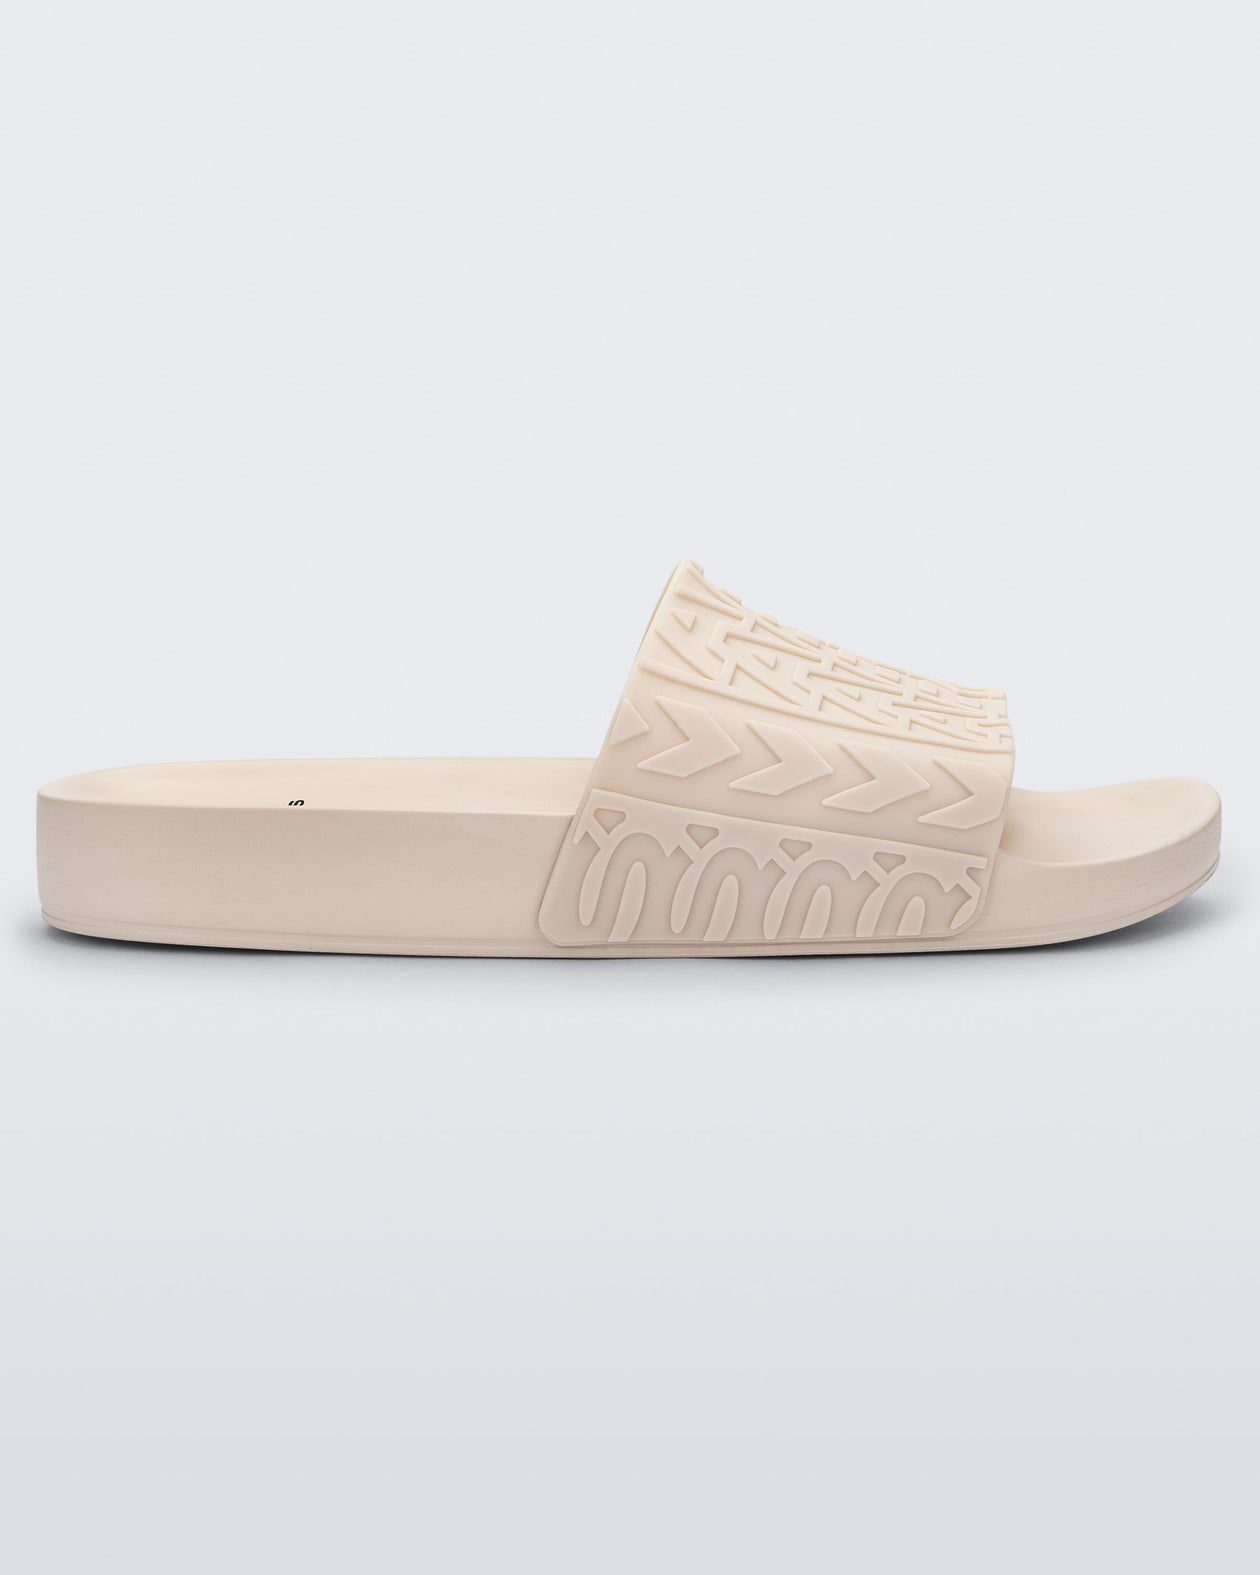 Side view of a beige Melissa Slide with the Marc Jacob's logo across the front strap.